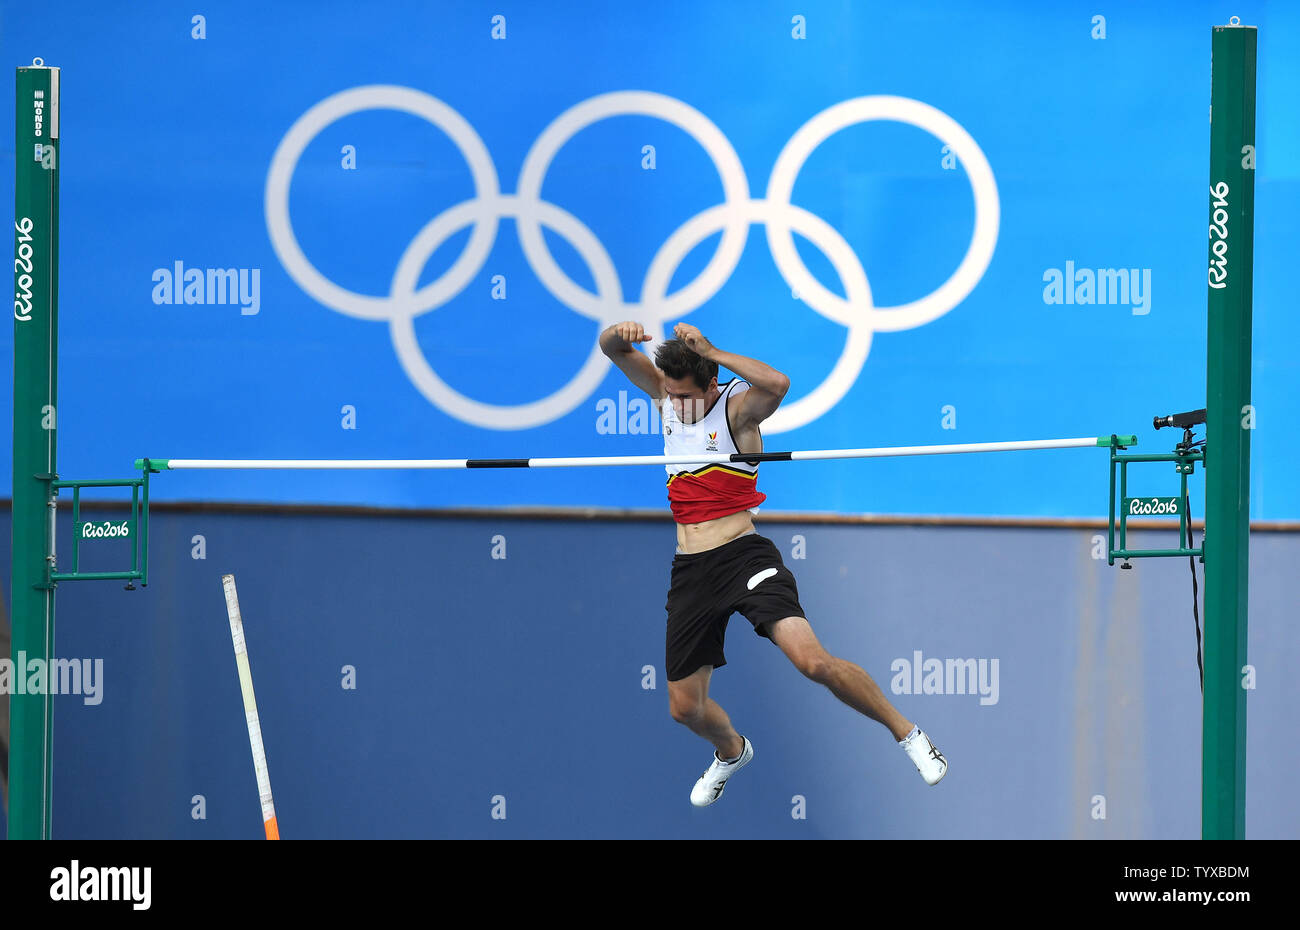 Thomasclears van der Plaetsen of Belgium clears the bar during the Men's Decathlon Pole Vault at Olympic Stadium at the 2016 Rio Summer Olympics in Rio de Janeiro, Brazil, on August 18, 2016.  Photo by Kevin Dietsch/UPI Stock Photo